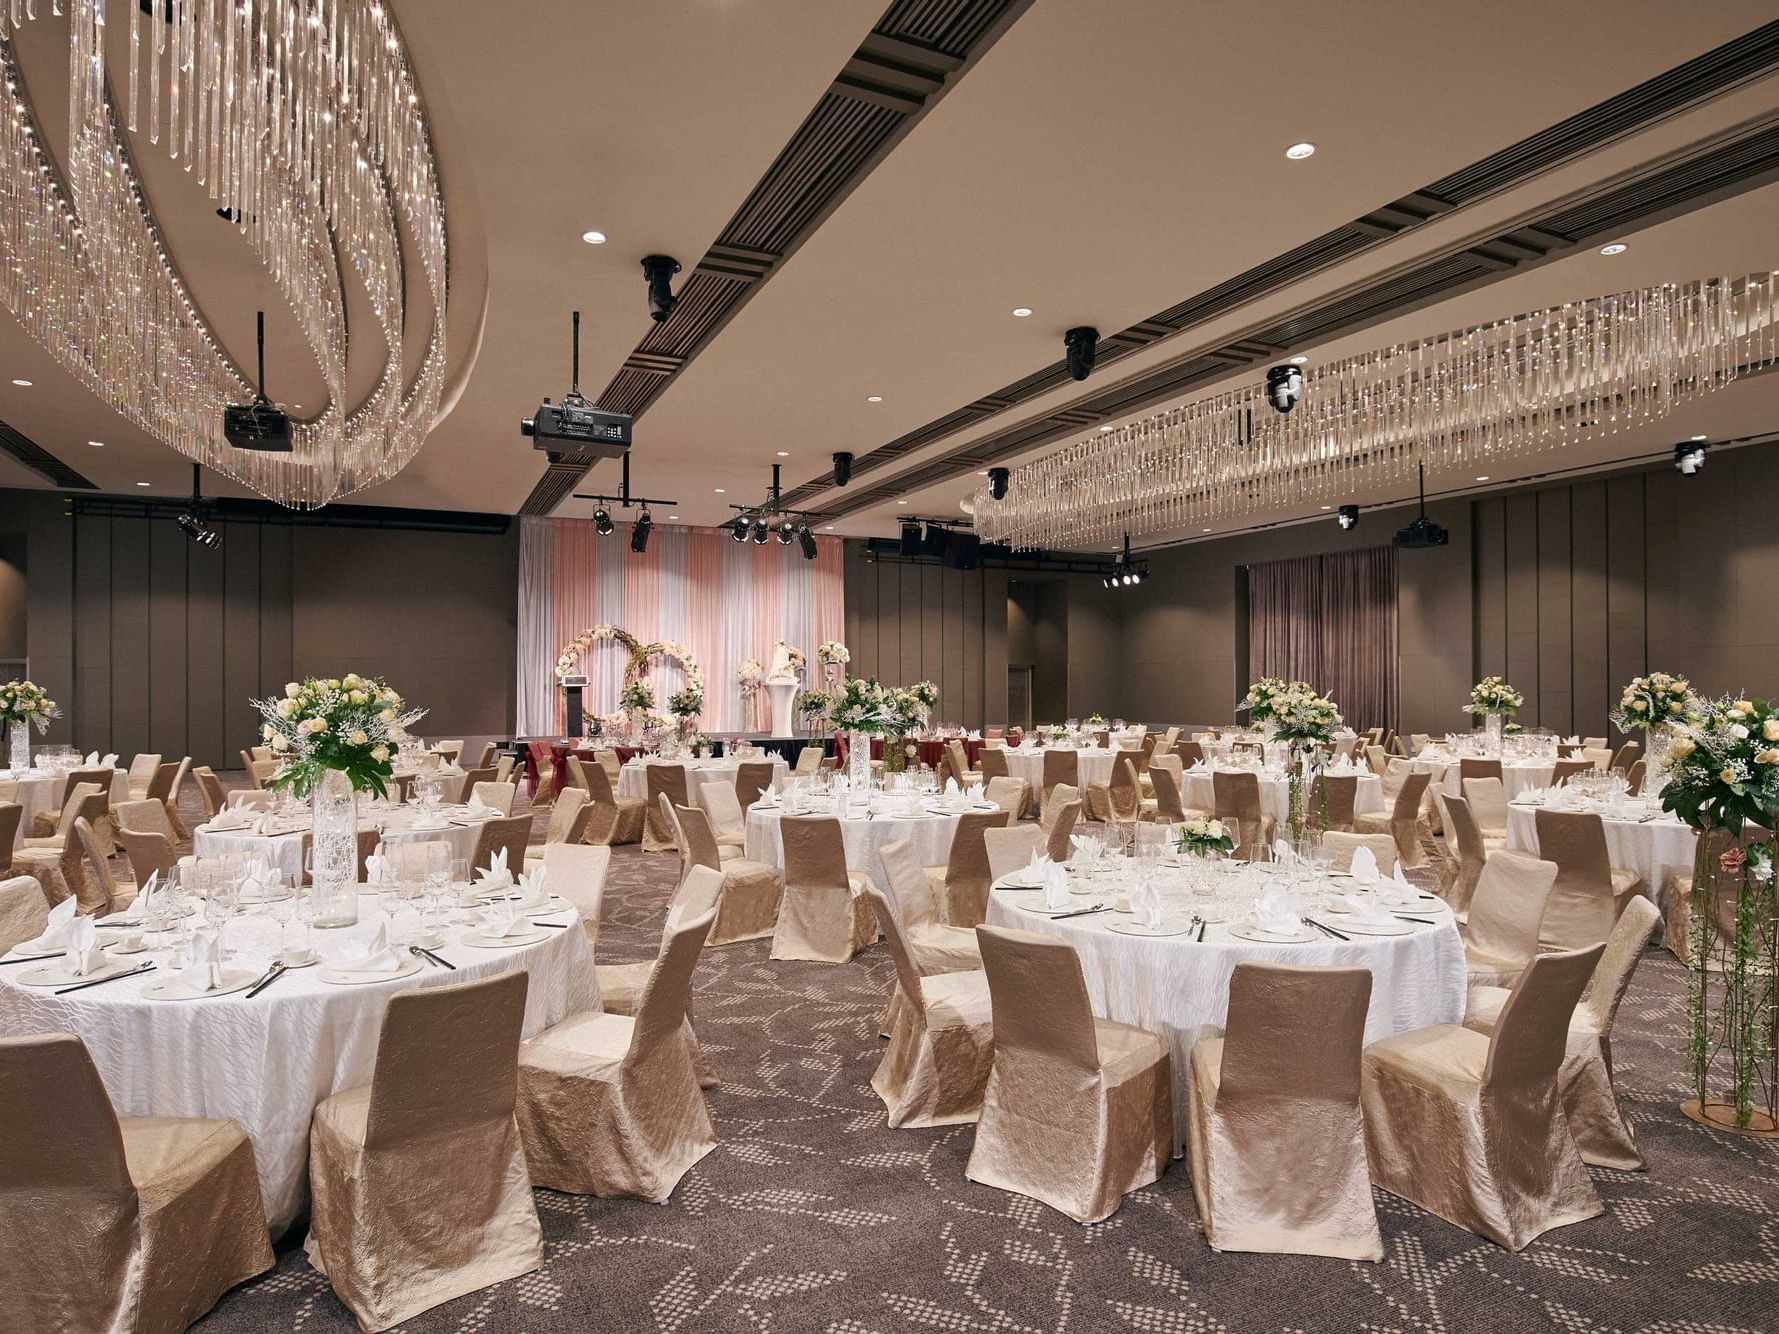 Interior of The Elegant Wedding Hall at One Farrer Hotel